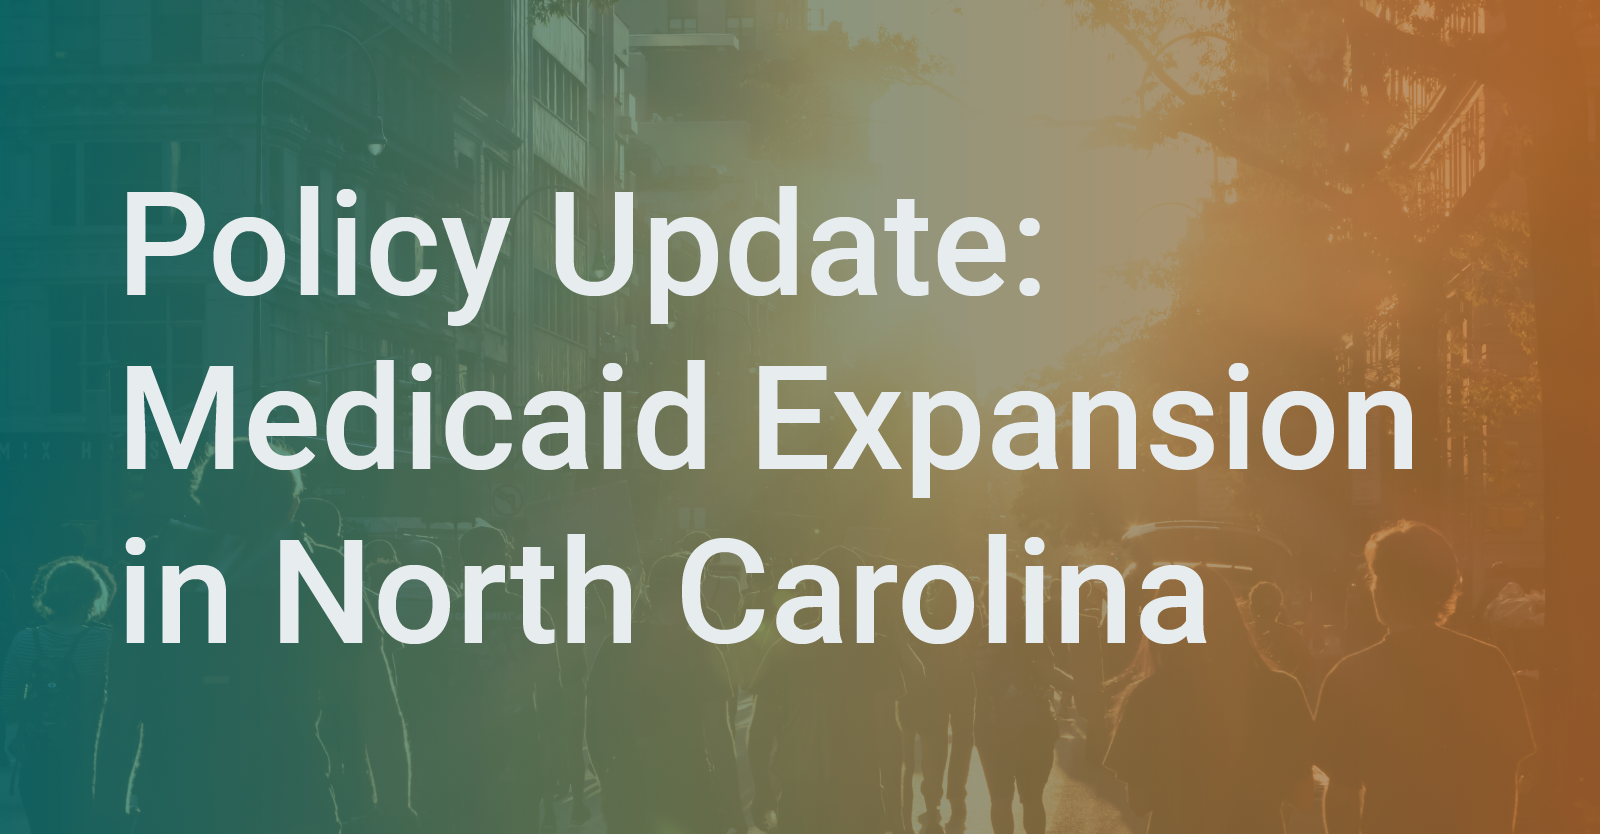 North Carolina House Votes in Favor of Medicaid Expansion